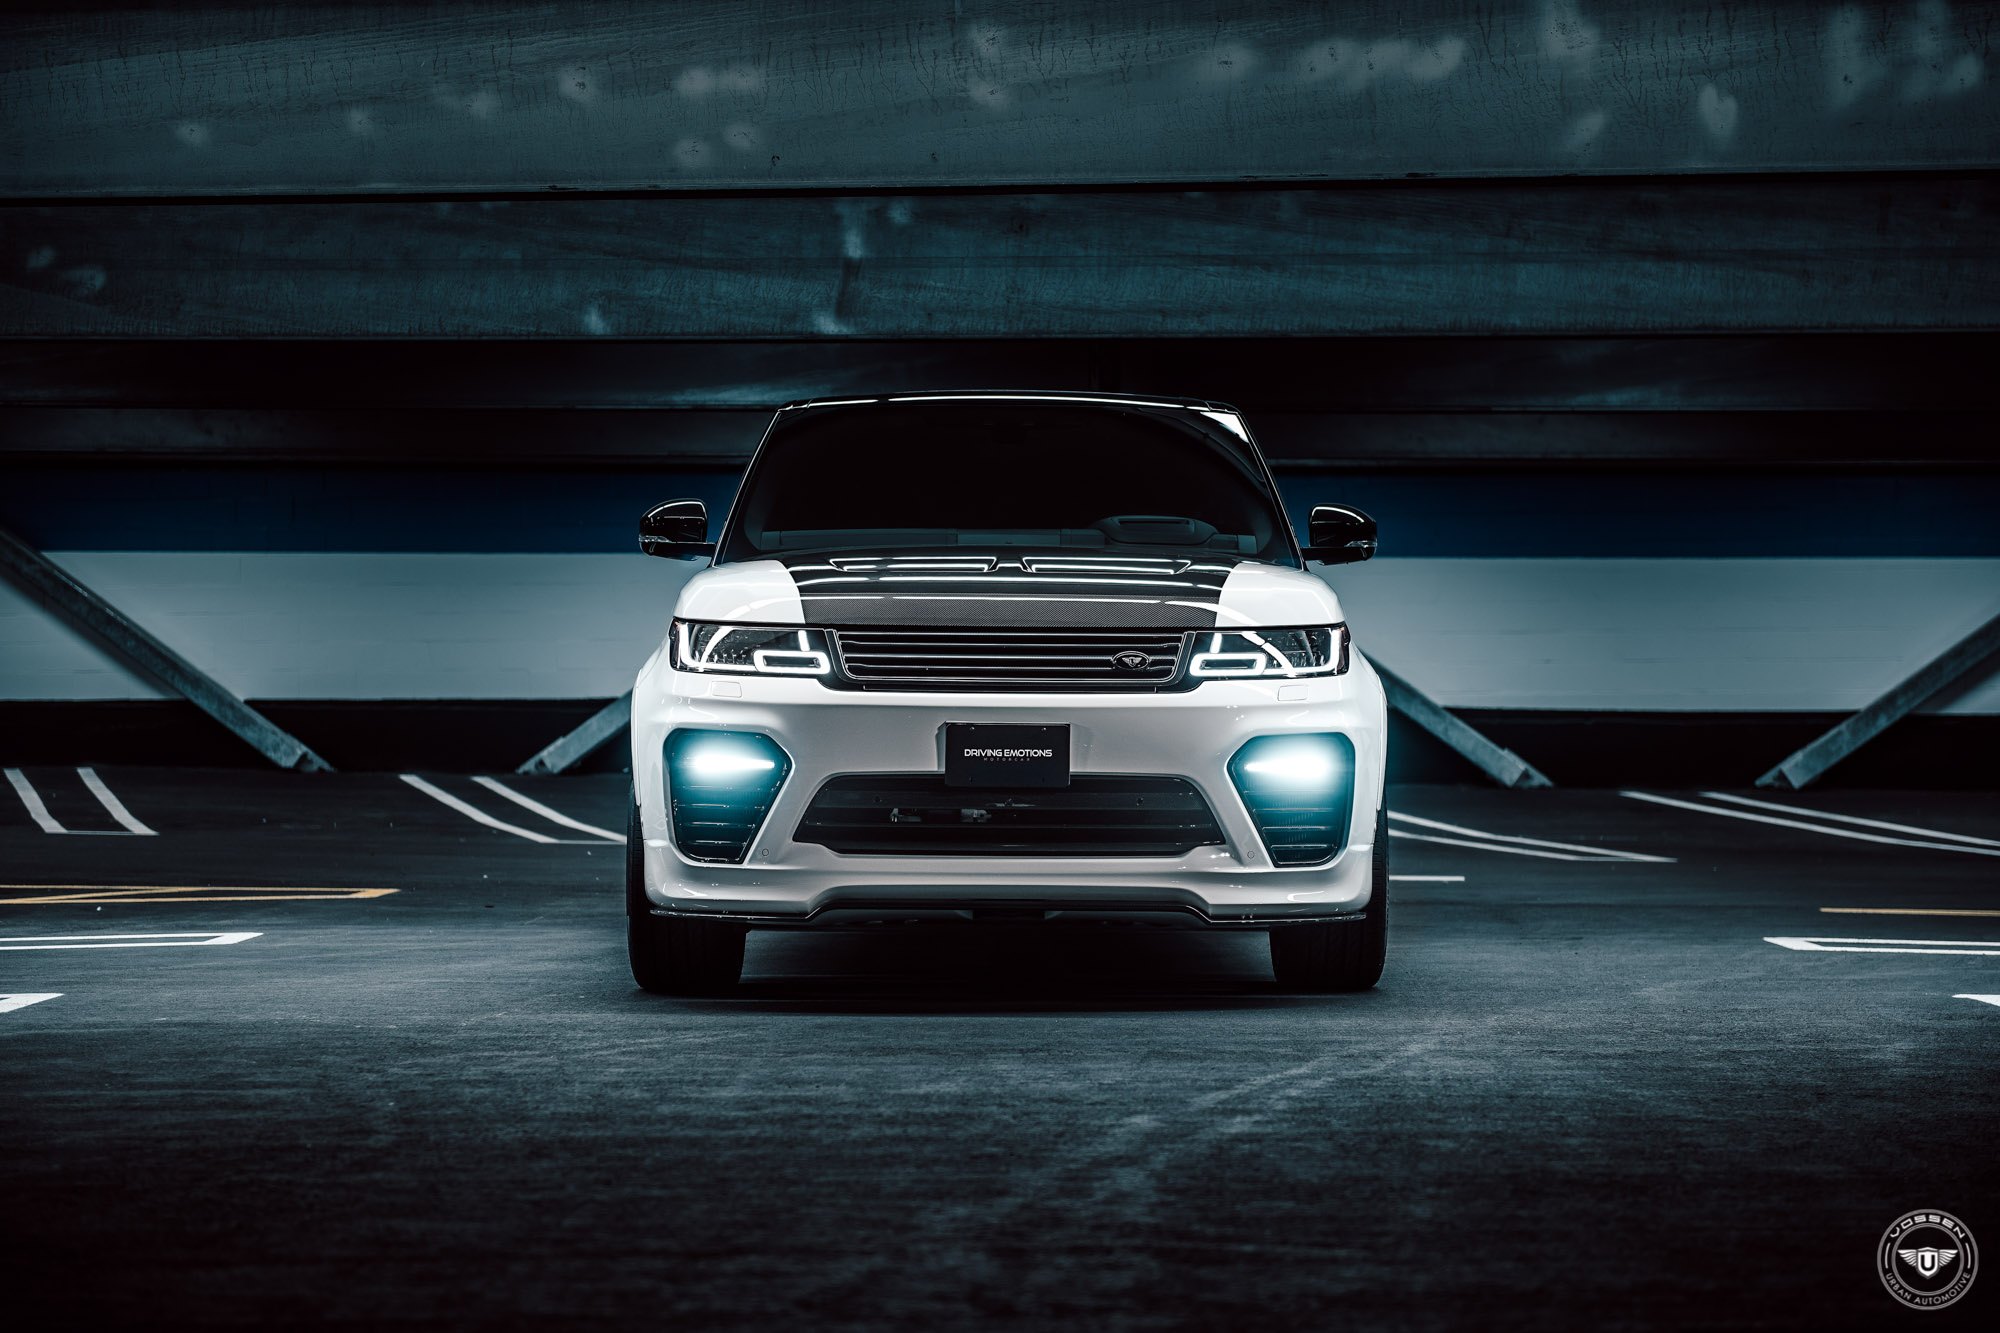 Front Bumper with LED Lights on Range Rover Sport - Photo by Vossen